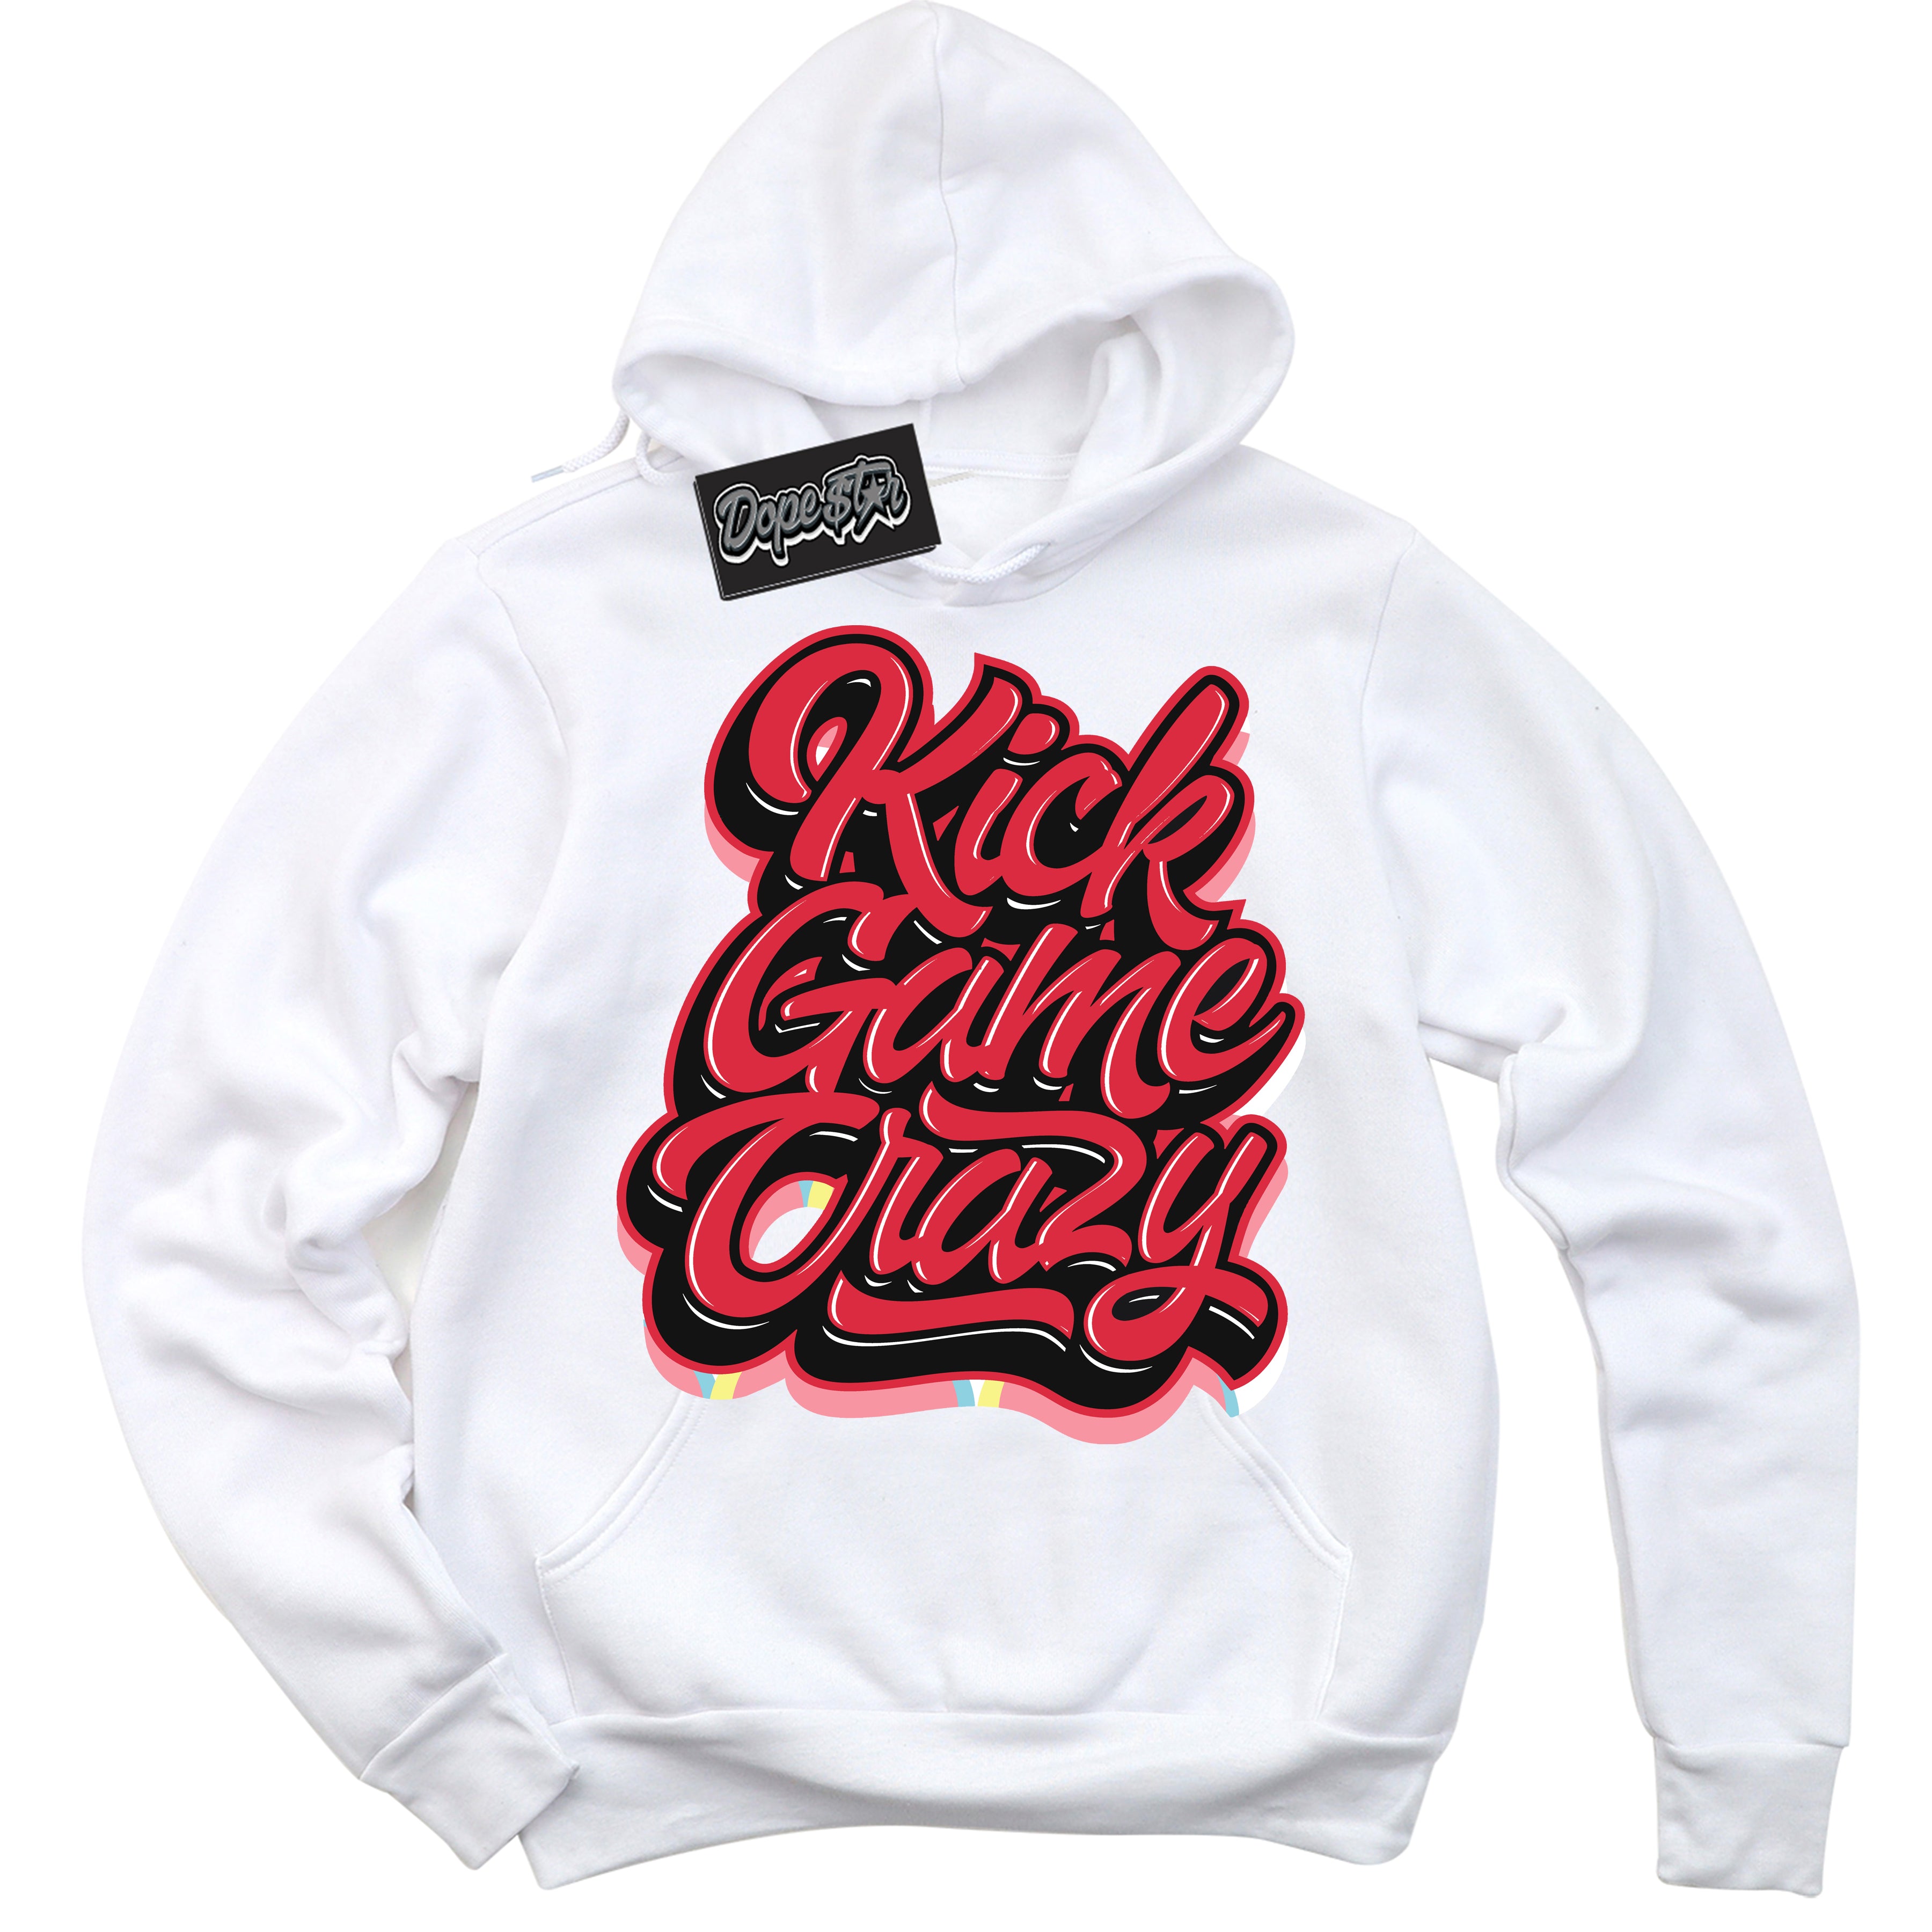 Cool White Graphic DopeStar Hoodie with “ Kick Game Crazy “ print, that perfectly matches Spider-Verse 1s sneakers